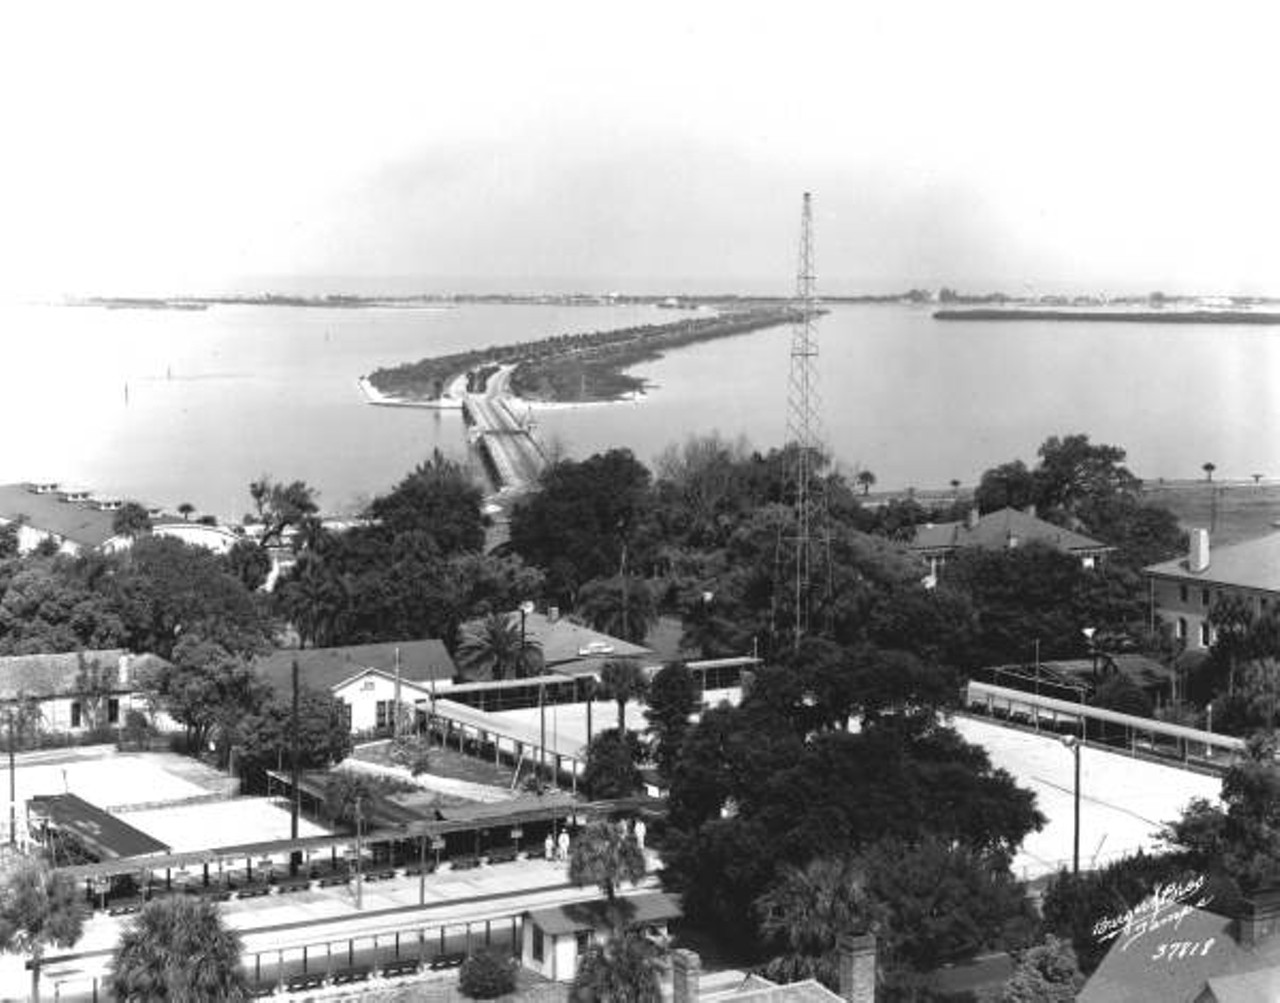 Bird's eye view of Clearwater Lawn Bowling Club and Memorial Causeway bridge. Published 1935.